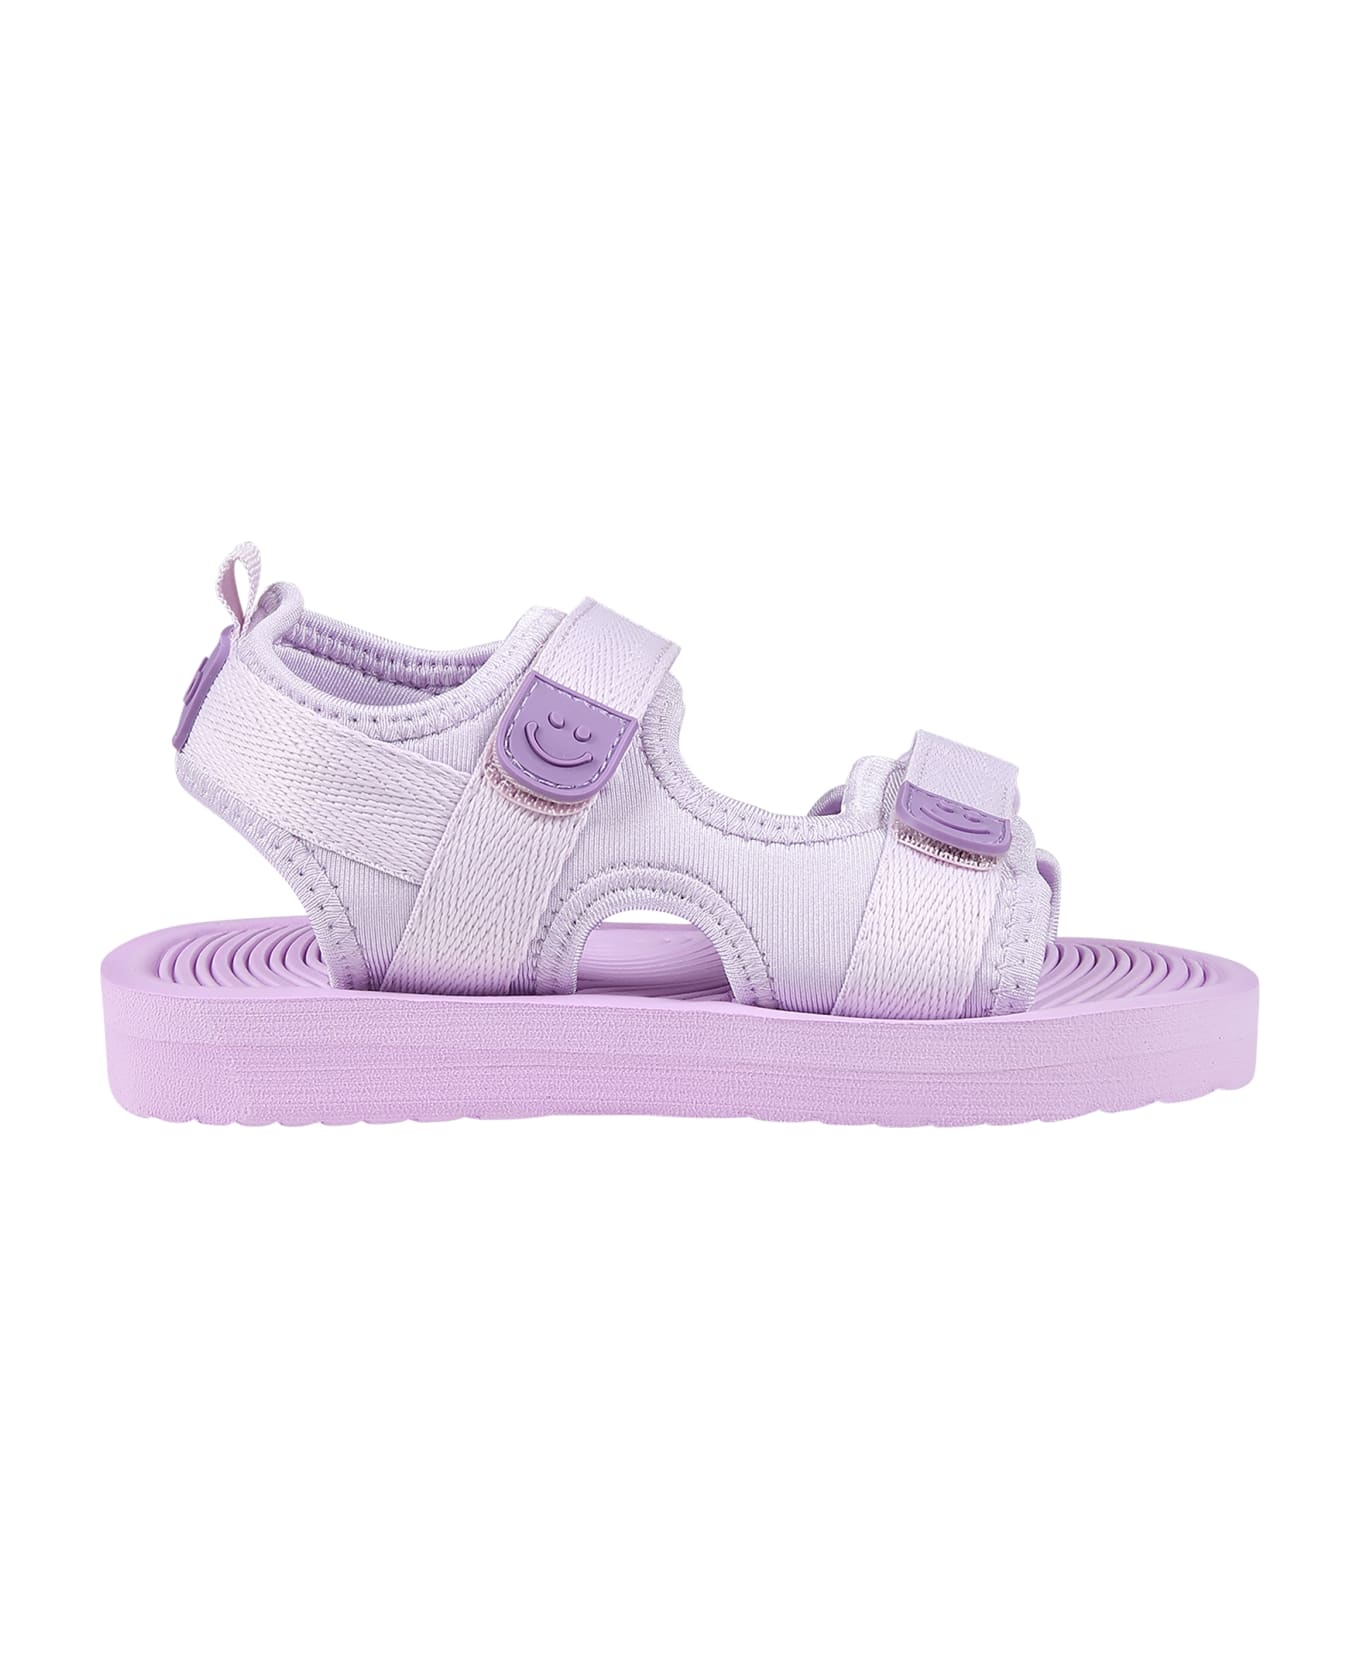 Molo Purple Sandals For Girl With Logo - Violet